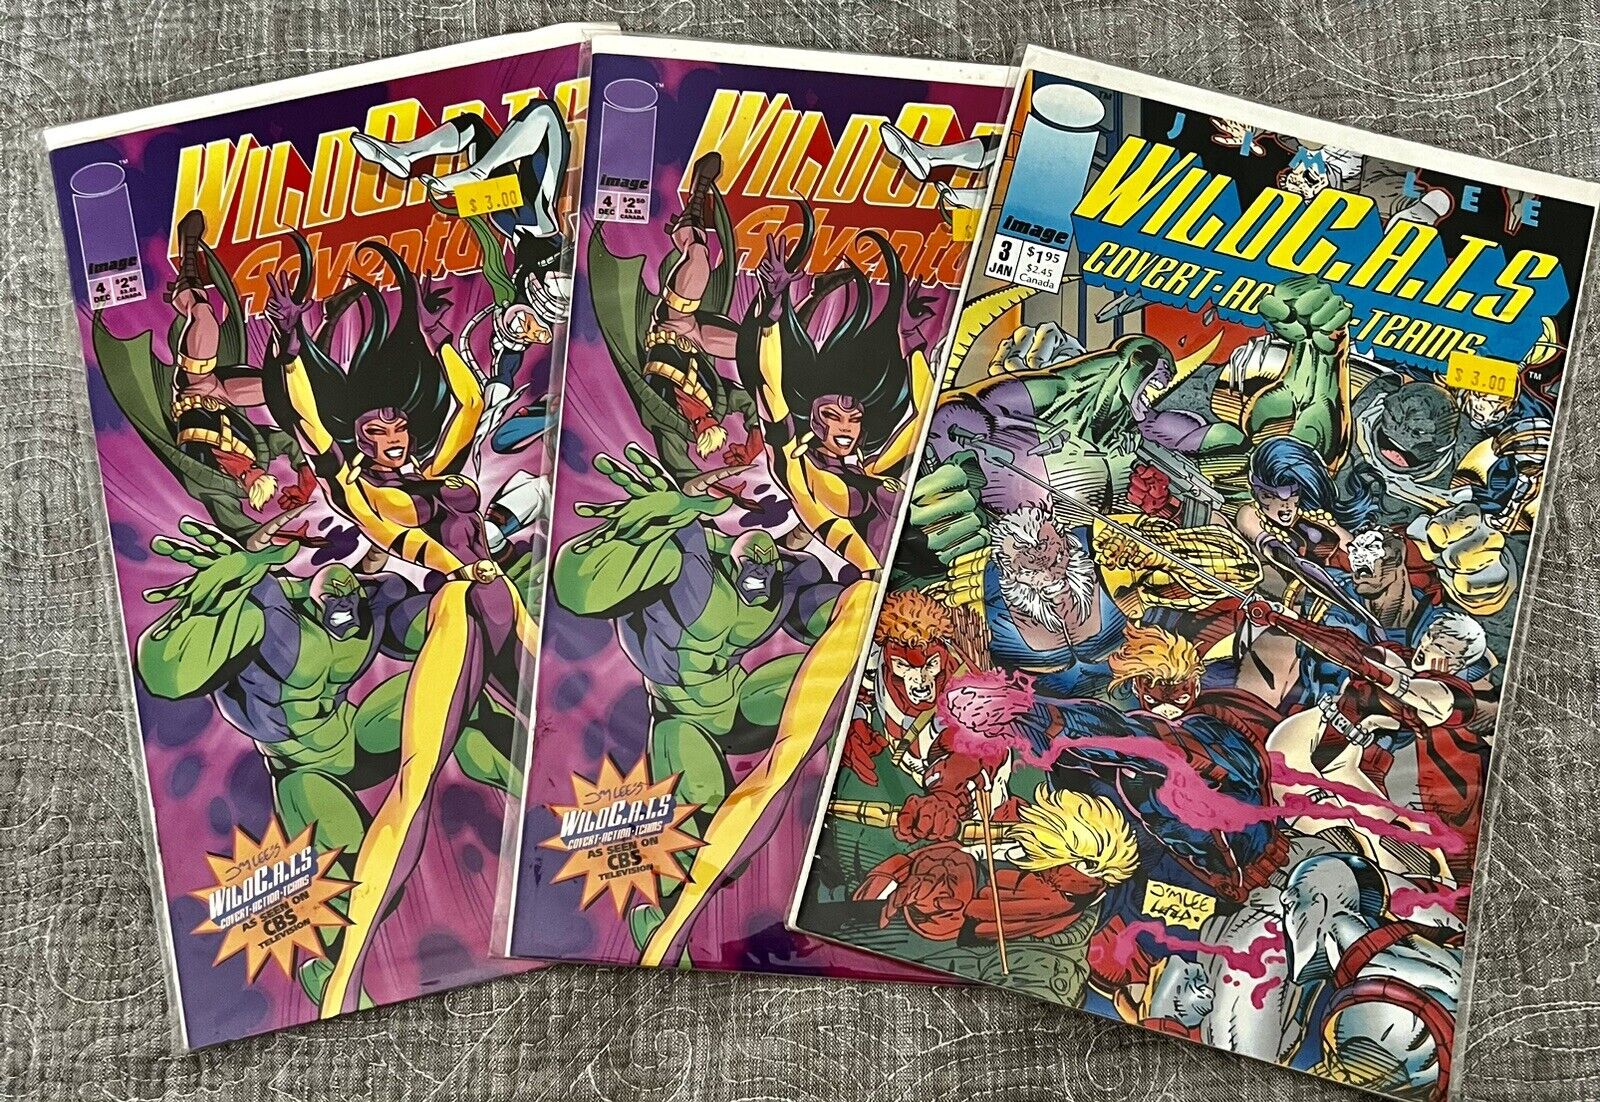 “WILD C.A.T.S.”BY IMAGE COMIC BOOKS SET OF 3:# 3,4,4 NEW SEALED